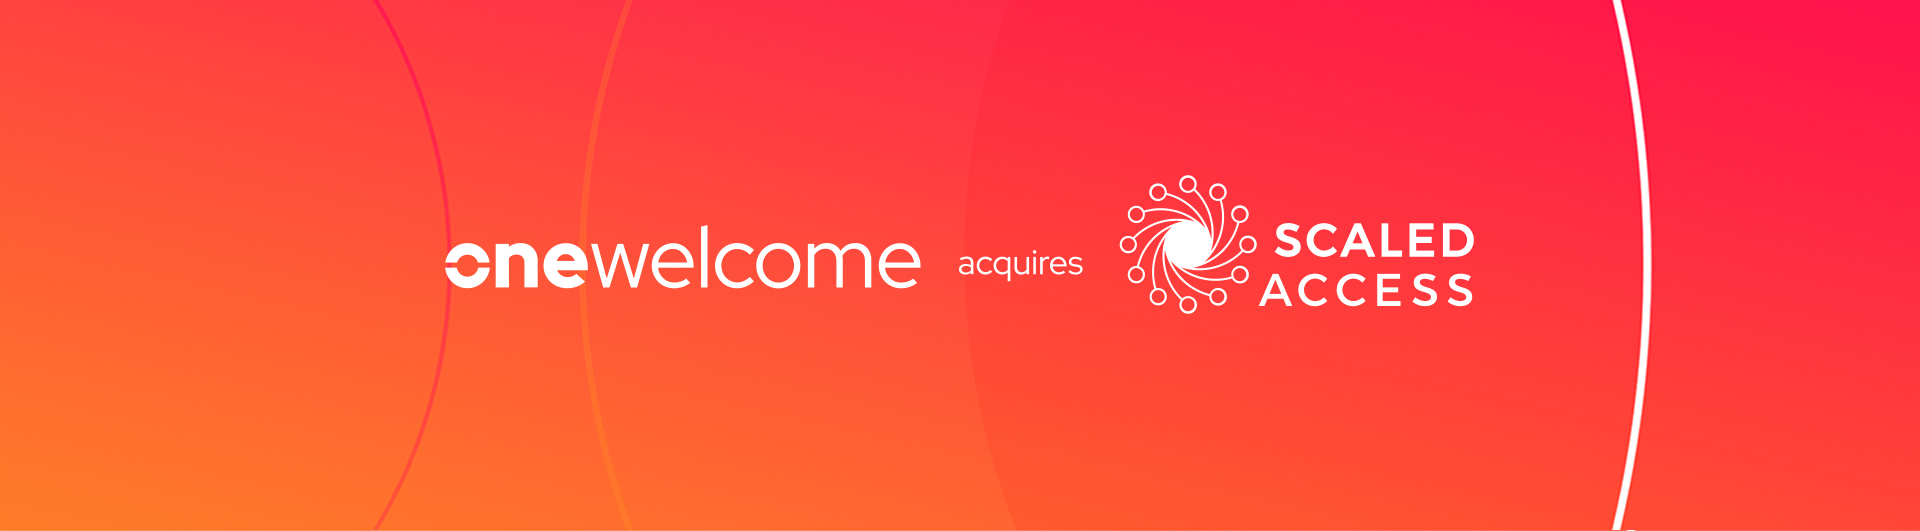 OneWelcome acquires Scaled Access